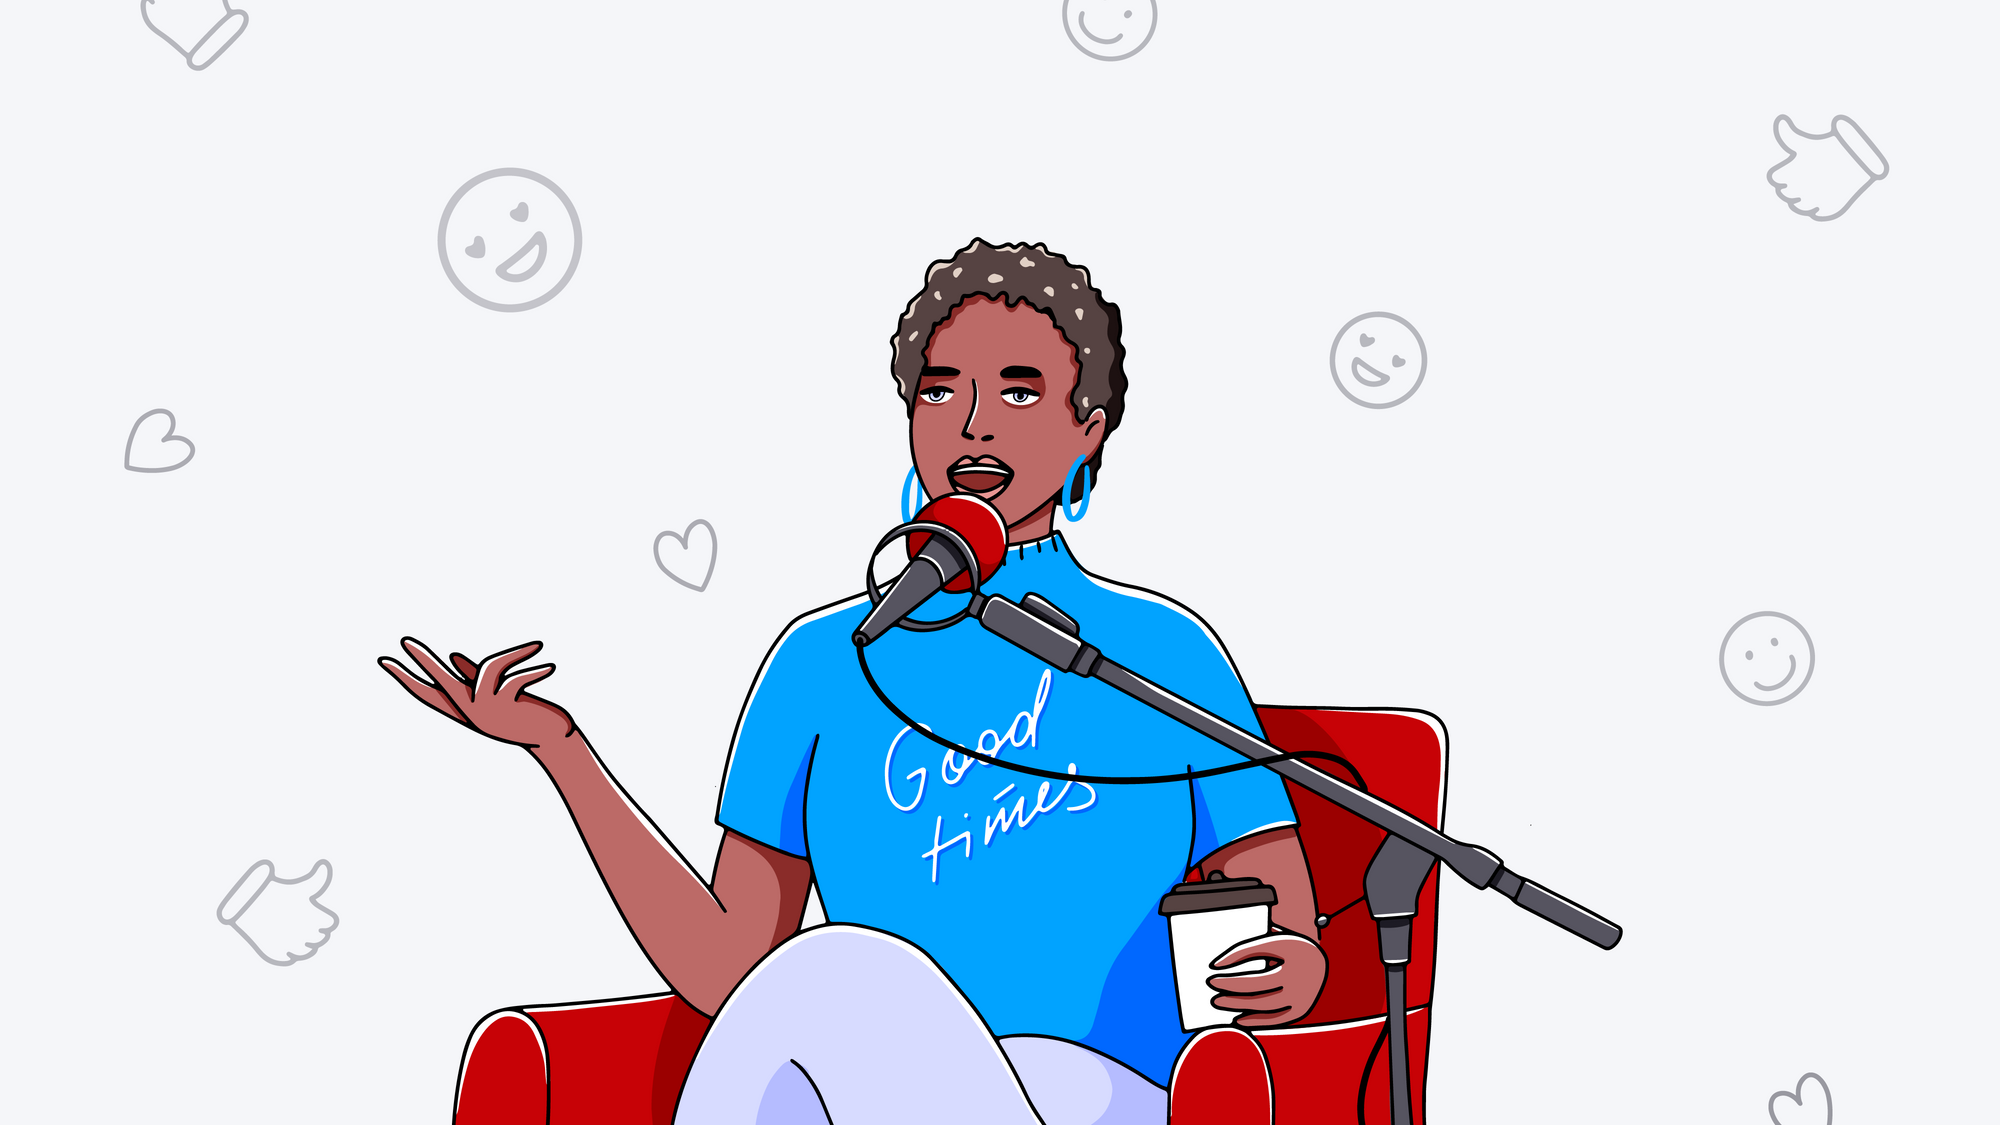 Podcast influencer speaking into a microphone